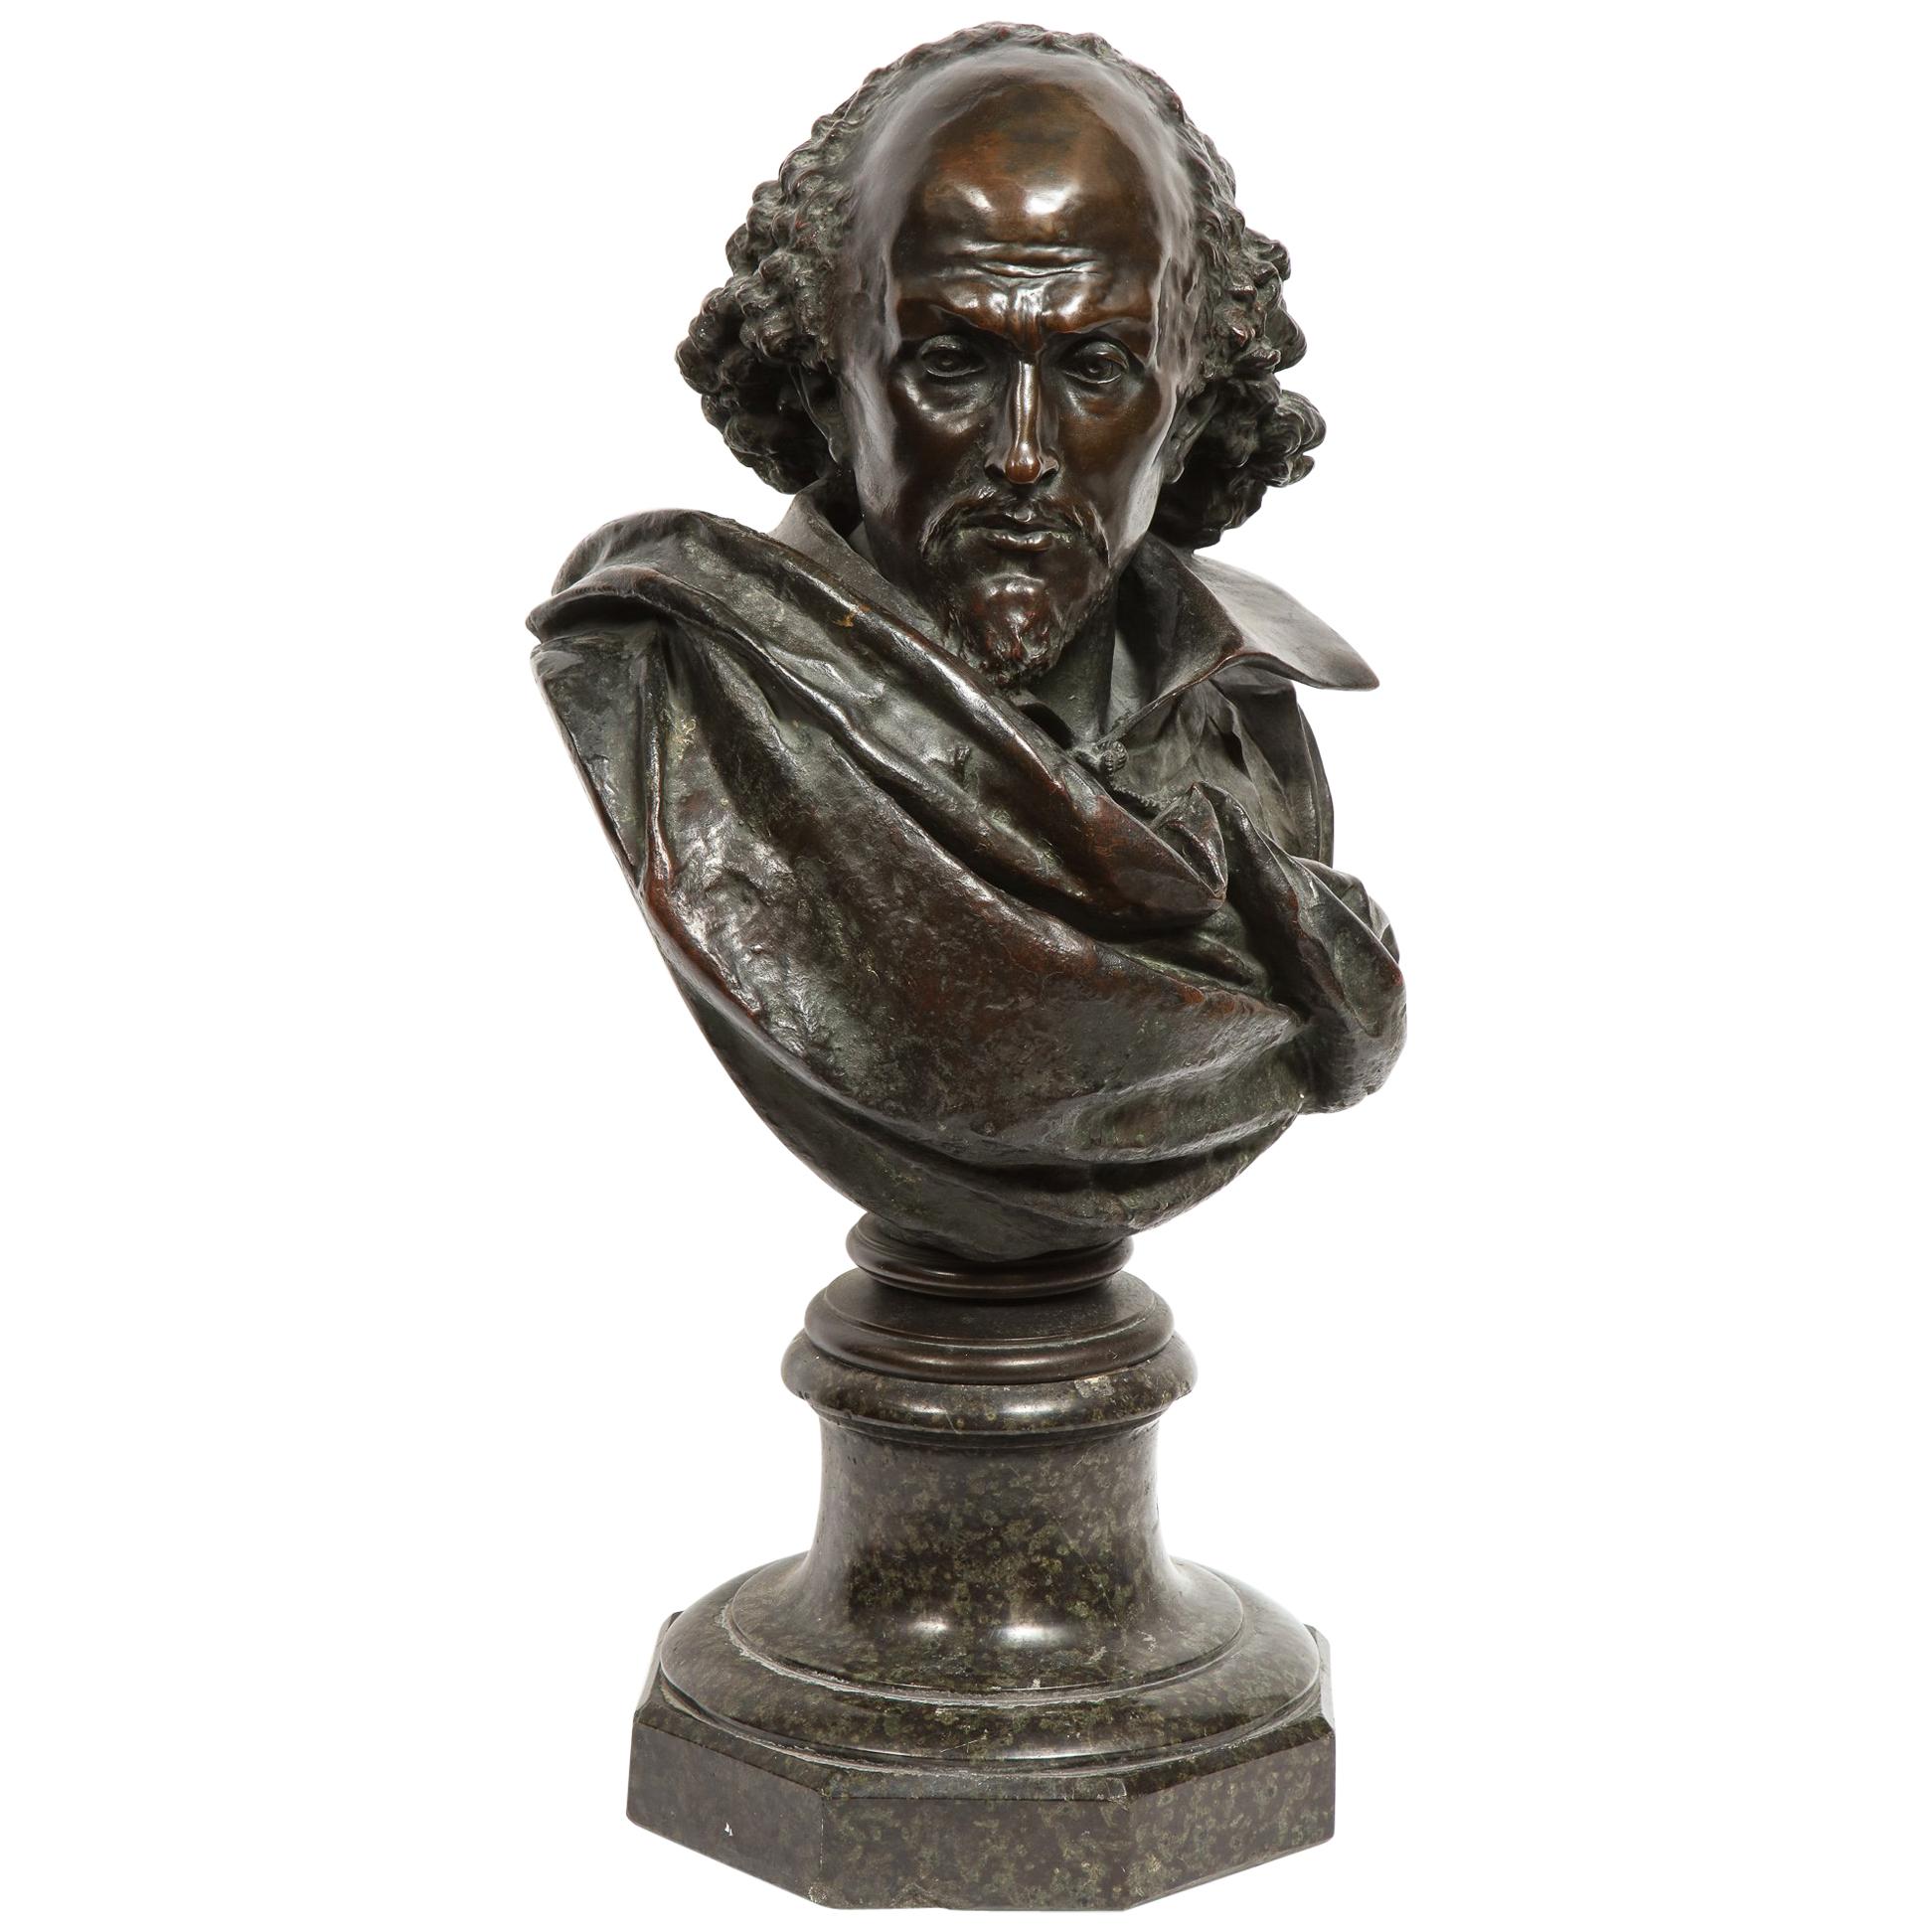 Rare French Patinated Bronze Bust of William Shakespeare, Carrier-Belleuse